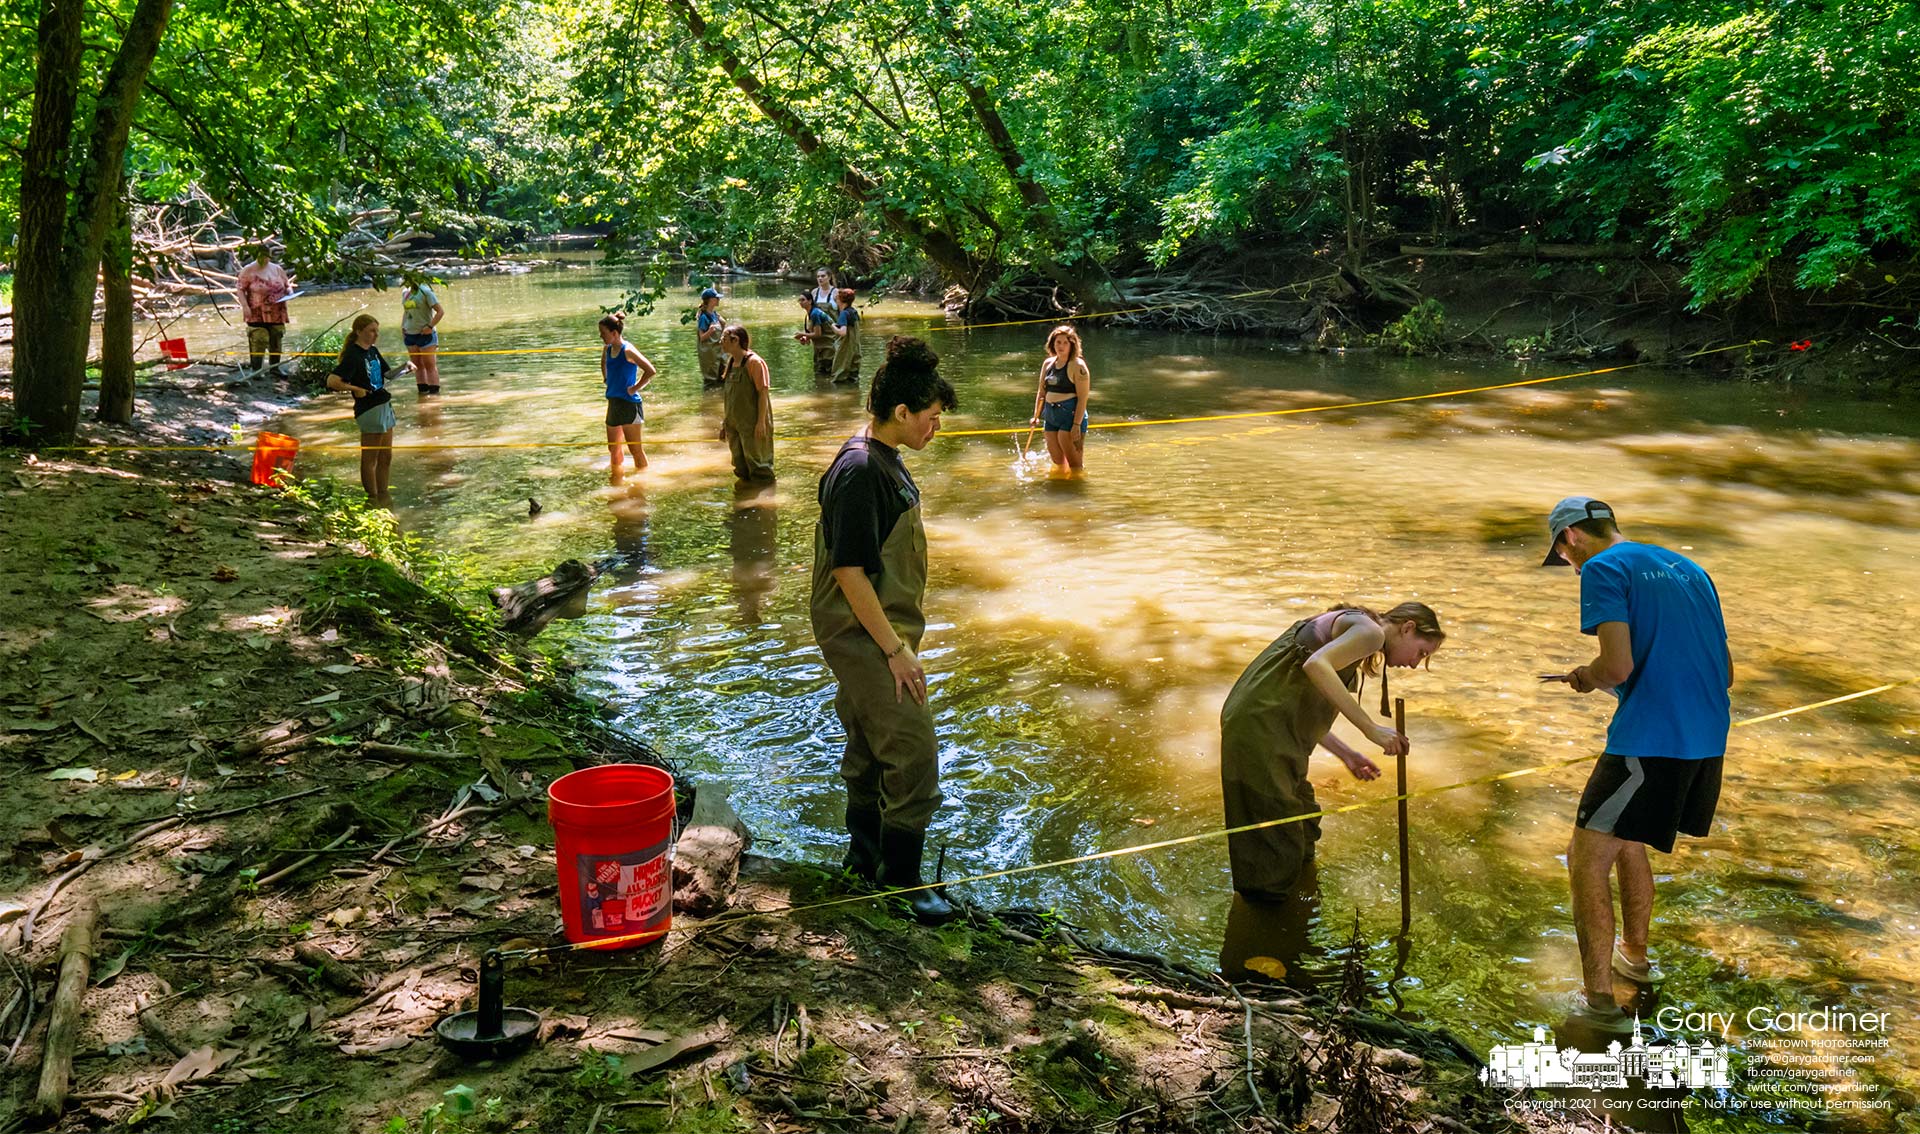 Otterbein University students perform a series of research projects during a class in the waters below the Alum Creek low-head dam in Westerville. My Final Photo for Aug. 24, 2021.